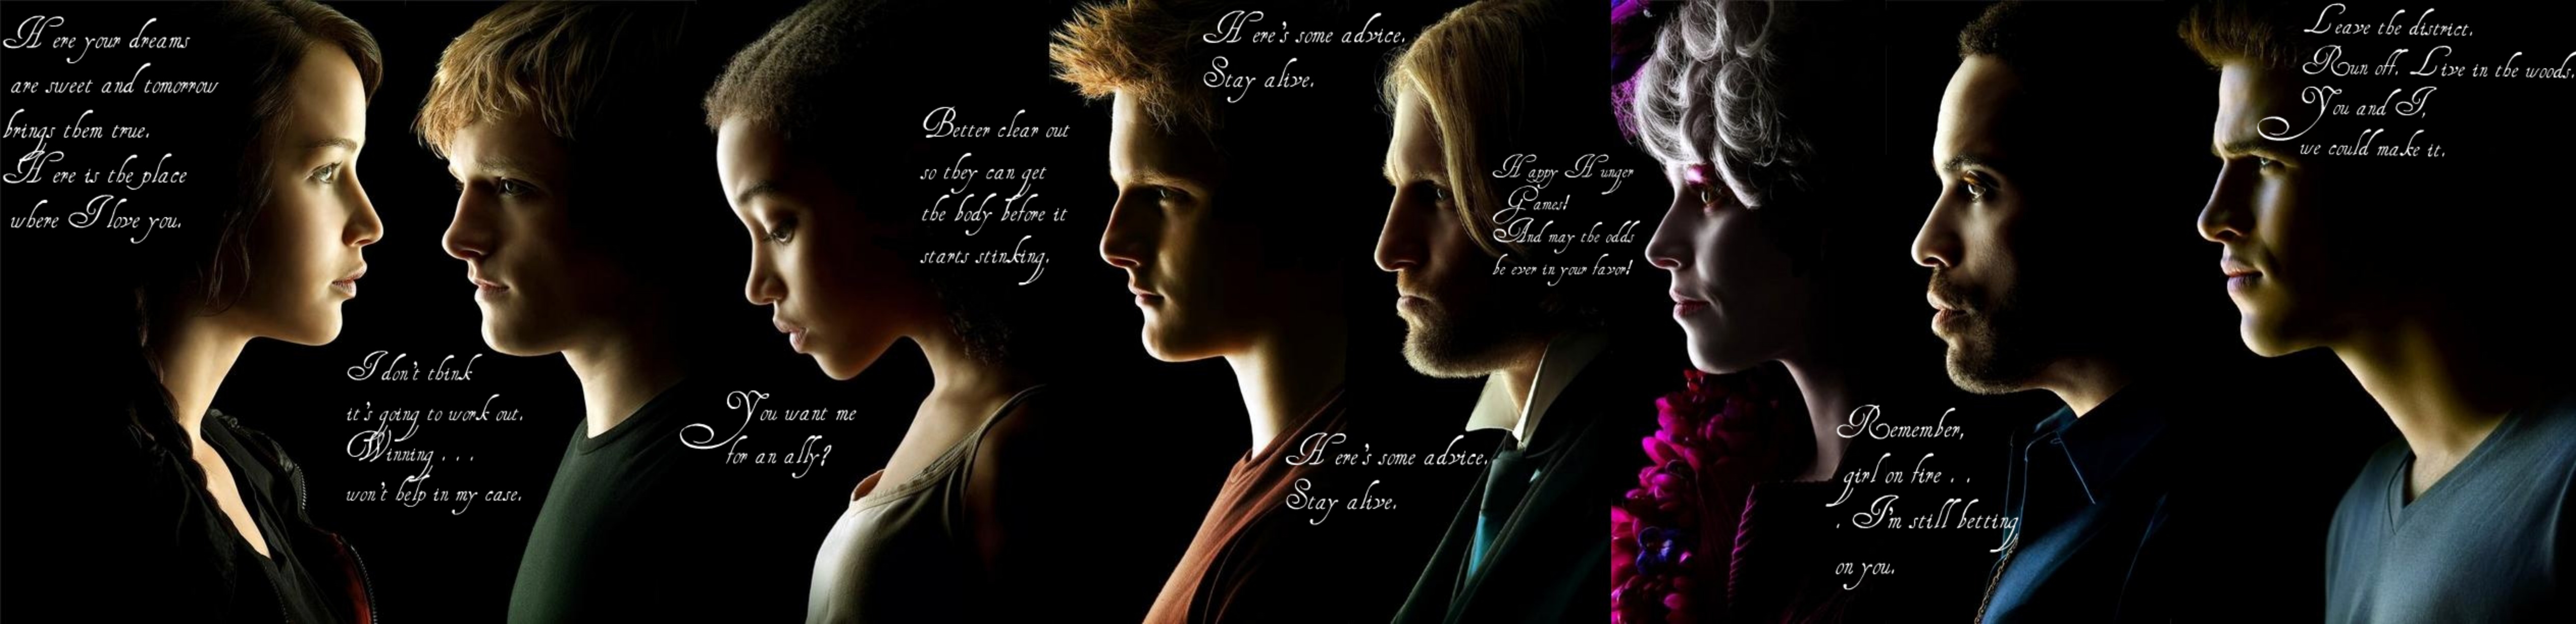 Hunger Games quote #1